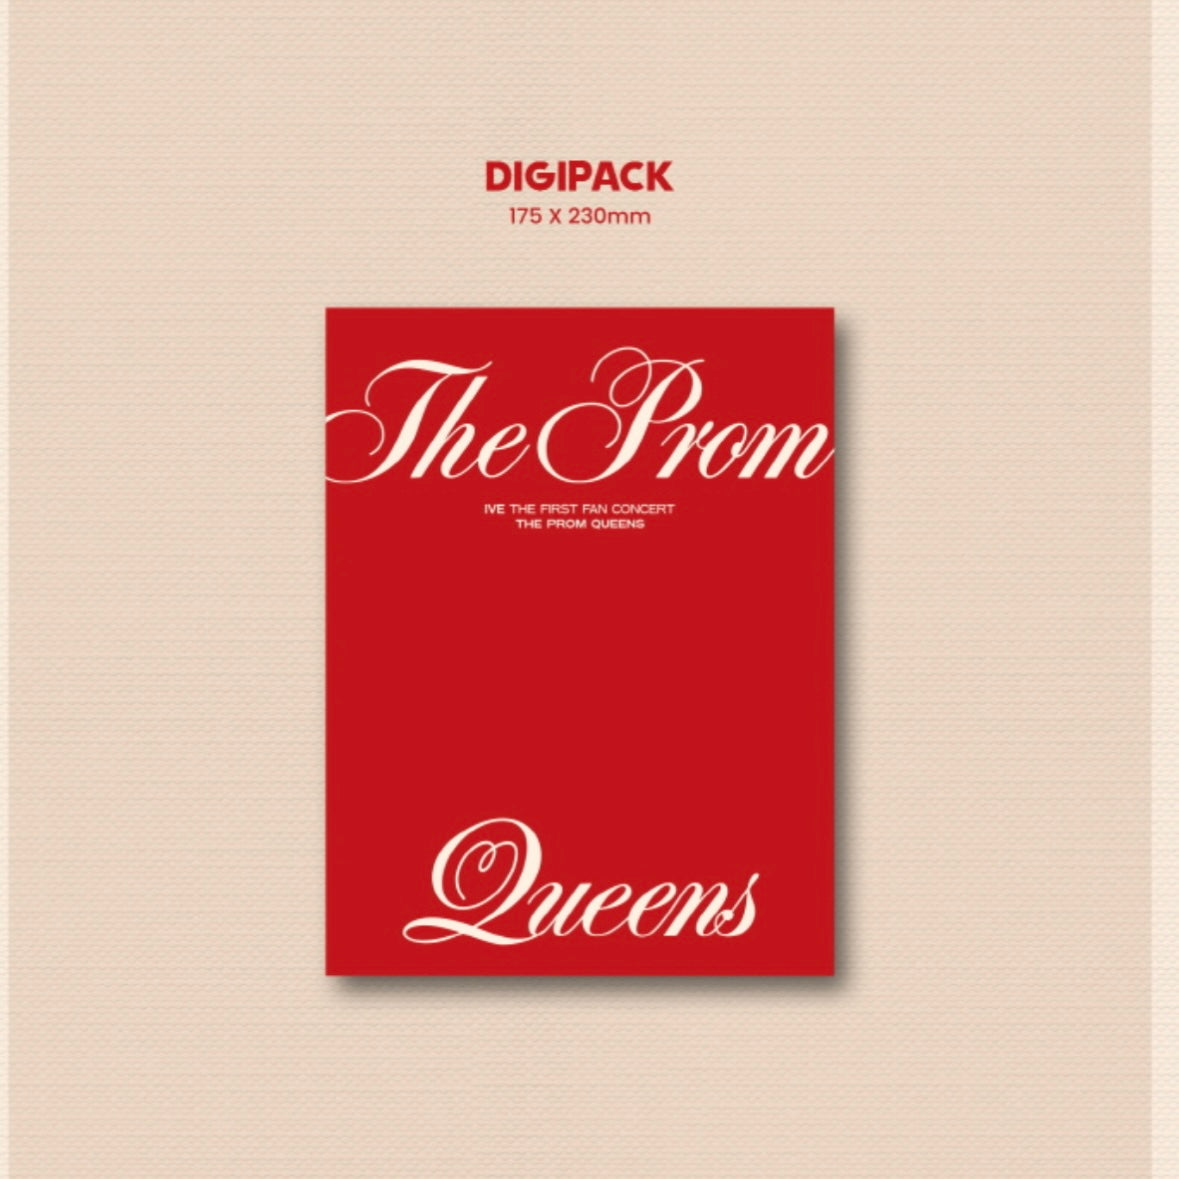 IVE - THE FIRST FAN CONCERT [THE PROM QUEENS] BLU-RAY